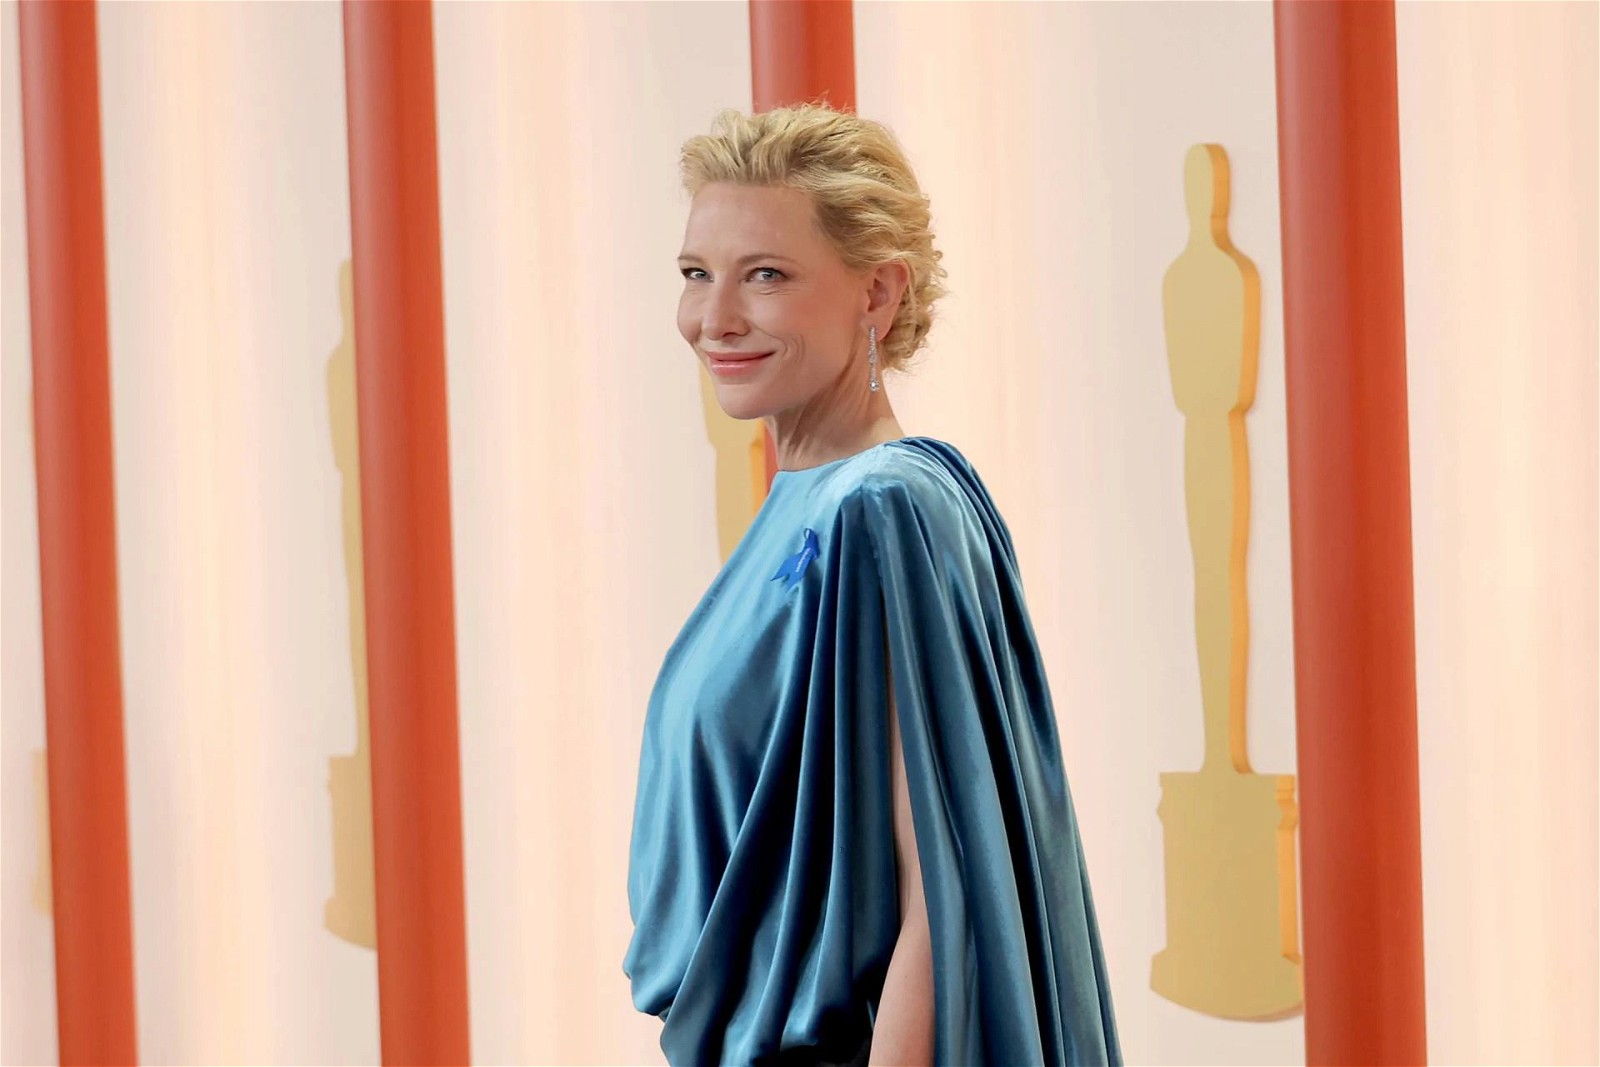 Cate Blanchett in a blue dress and blue ribbon pin at Oscars 2023